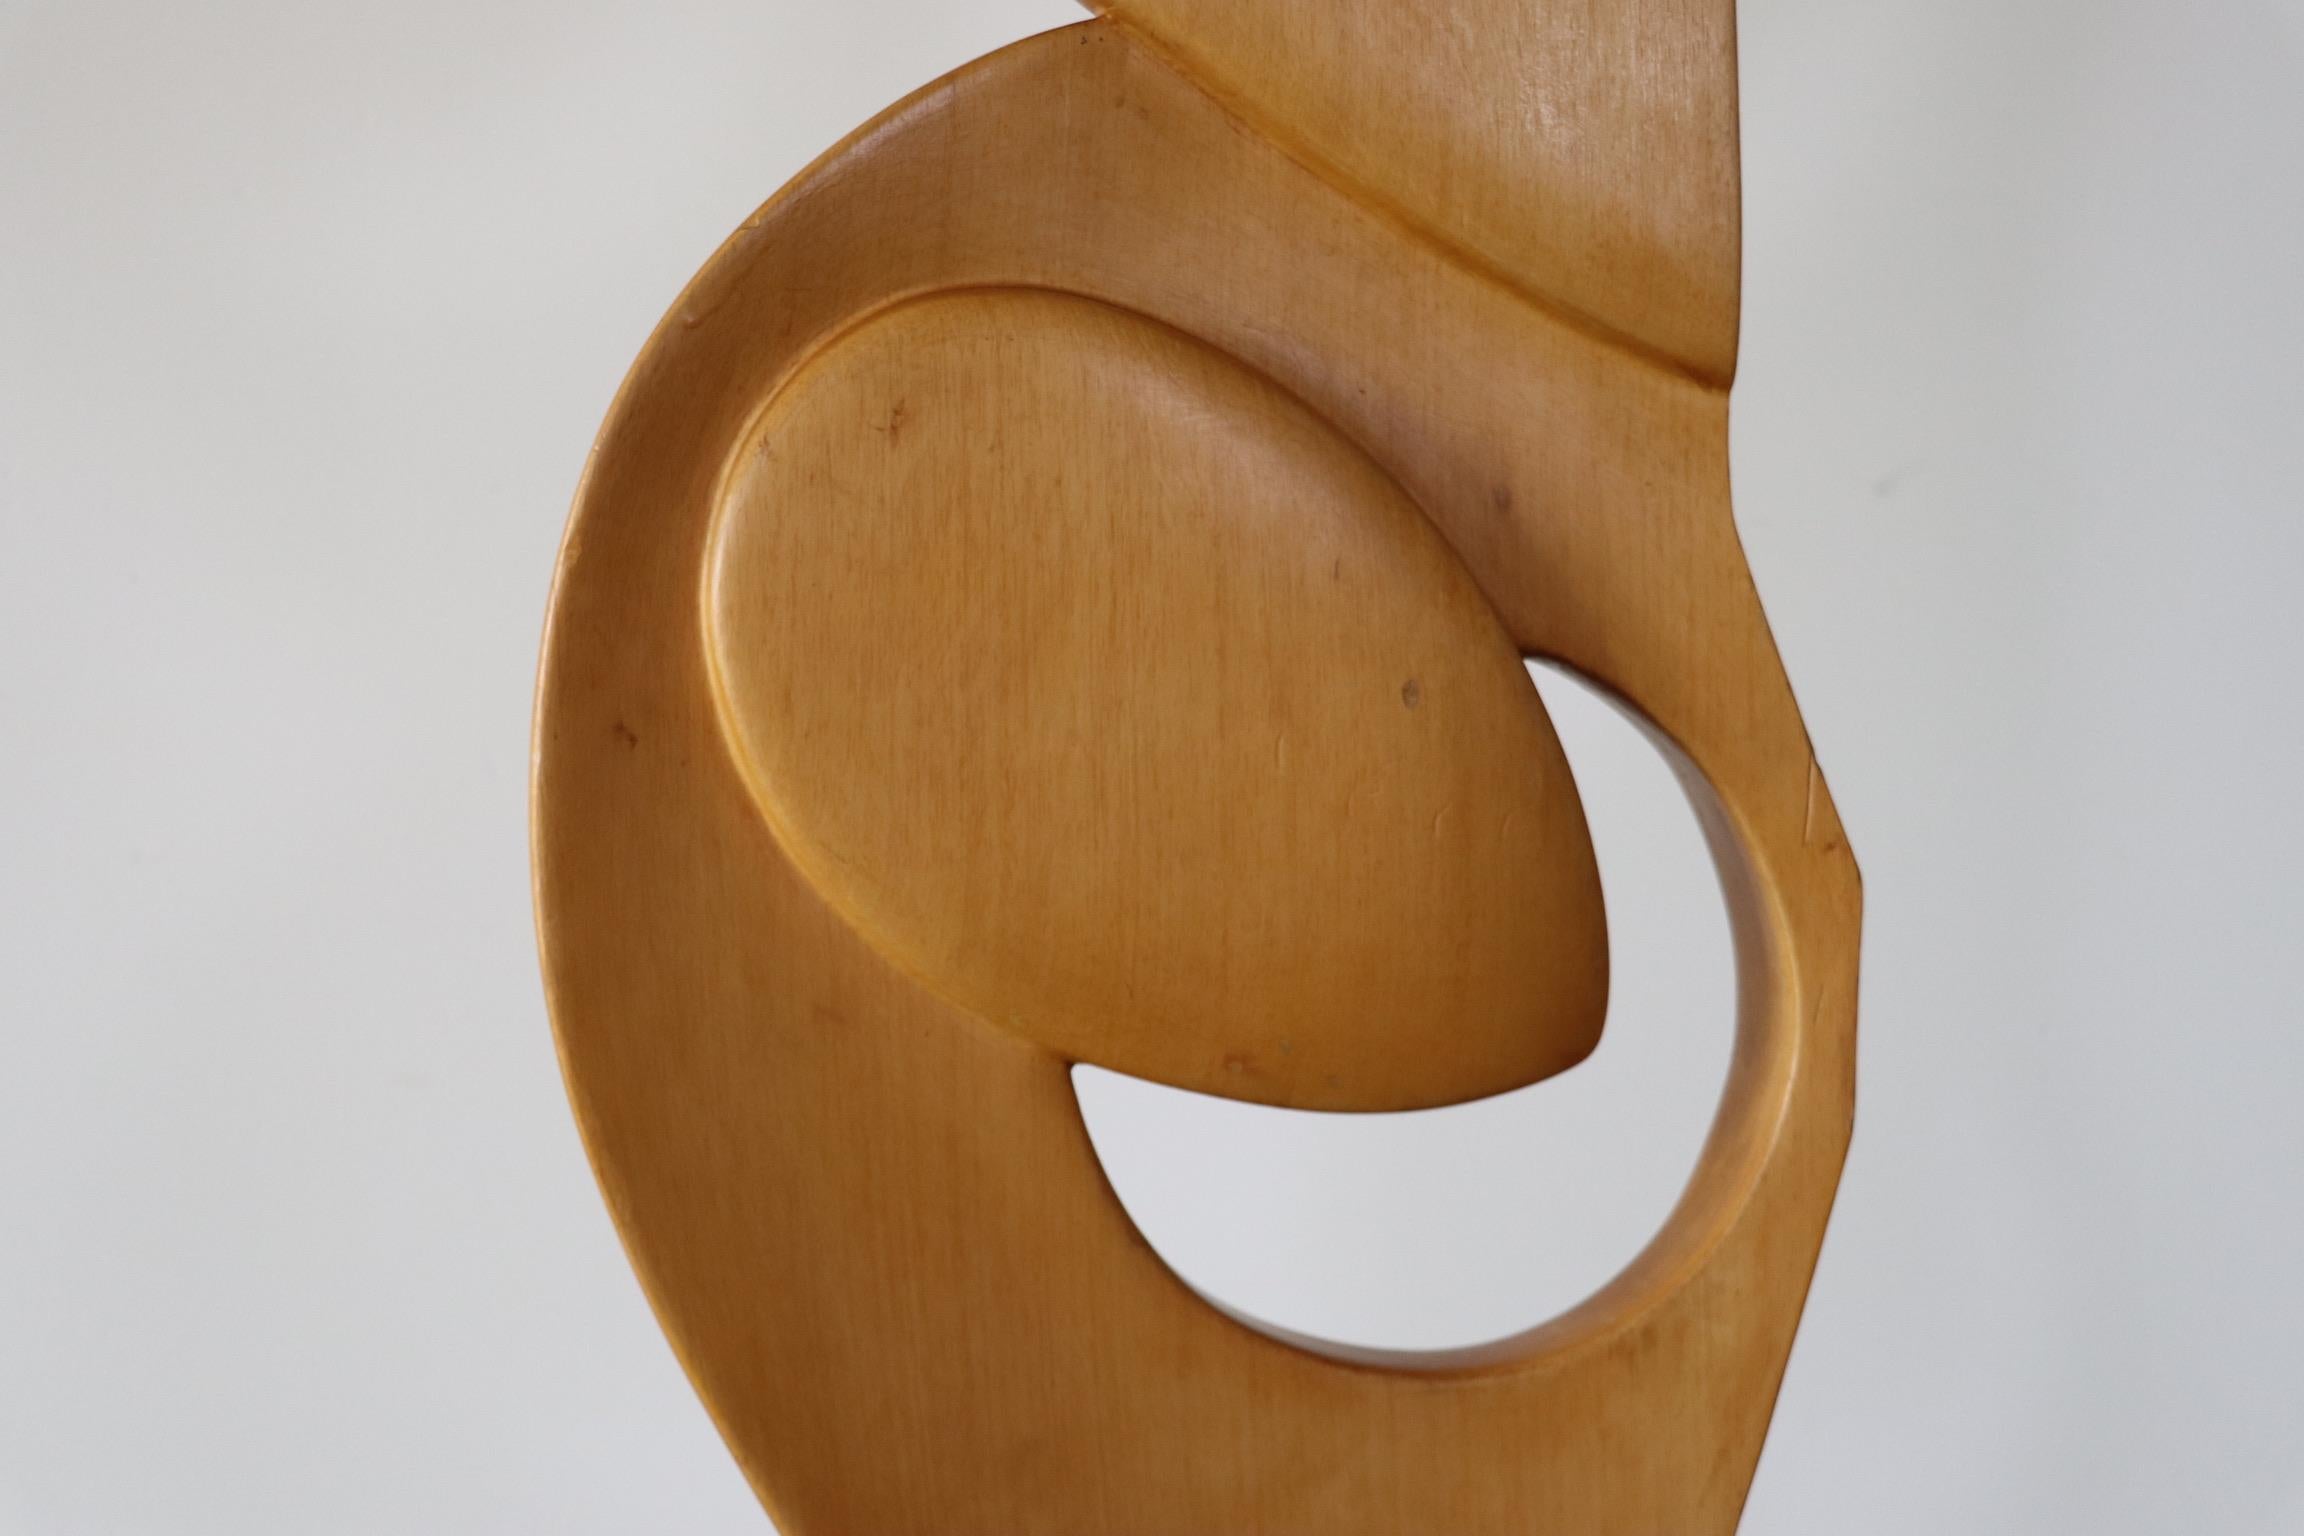 Large Abstract Wooden And Brass Sculpture By S. Do Lato, Italy 1970s For Sale 6